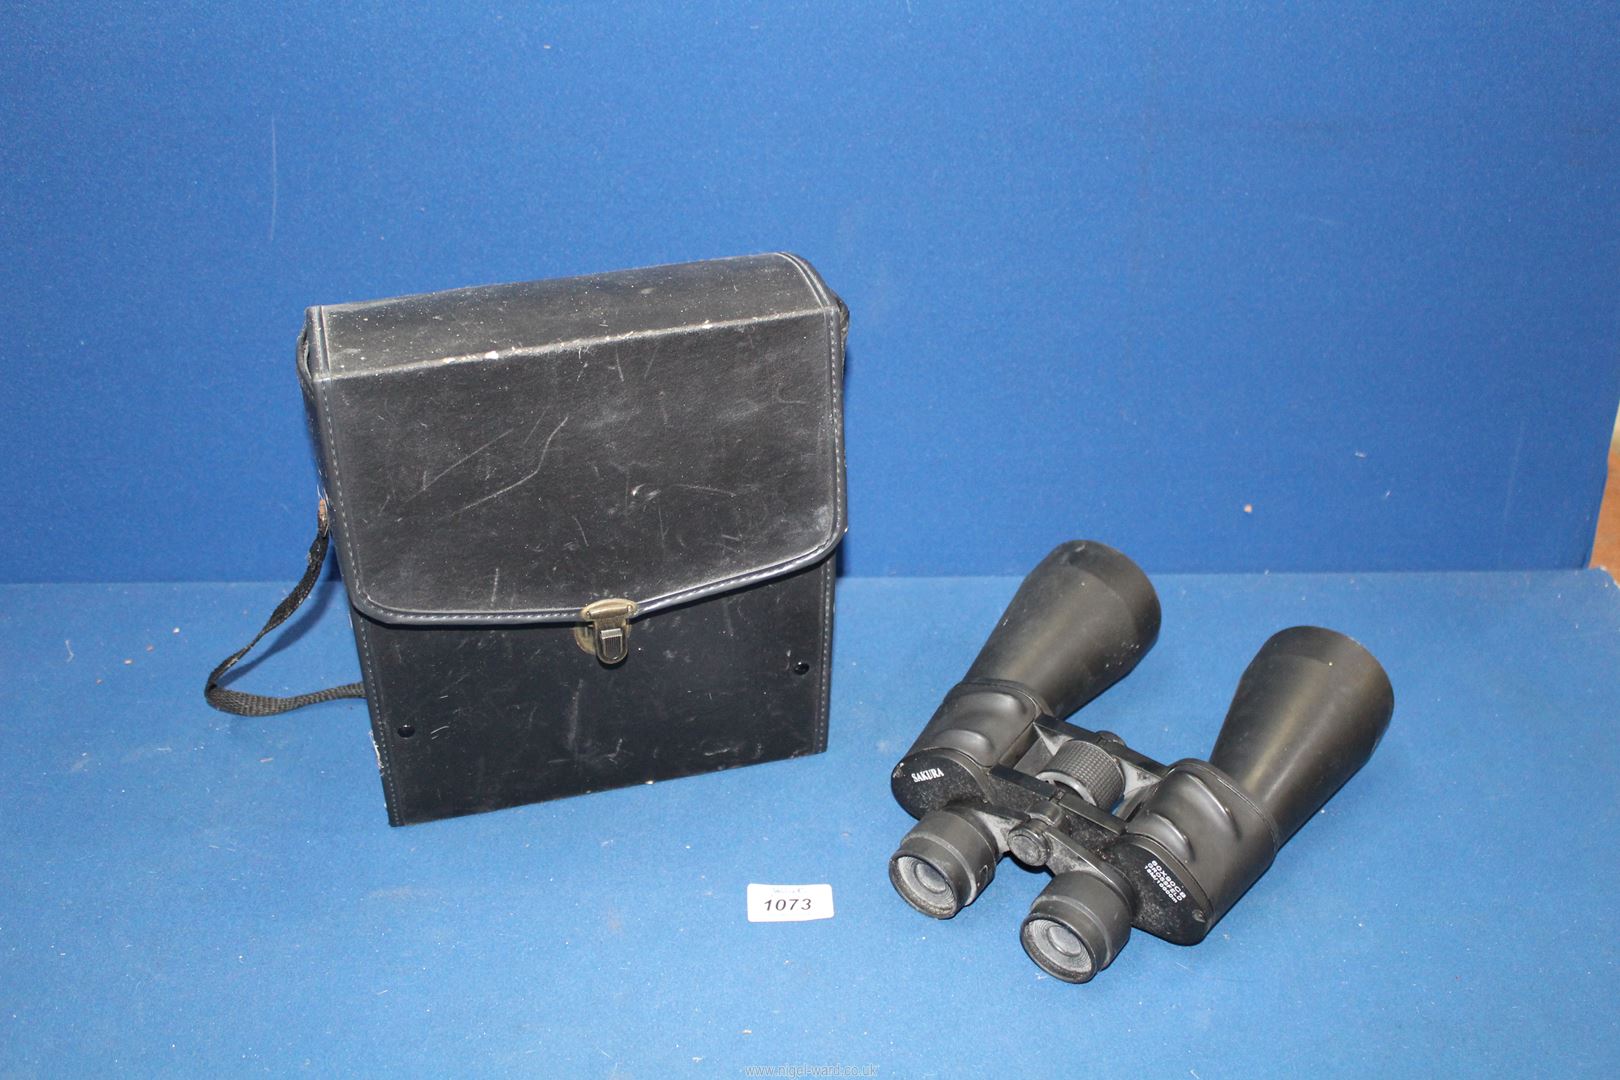 A cased pair of Sakura 60 x 90 Binoculars with grids visible, for naval or marine use.